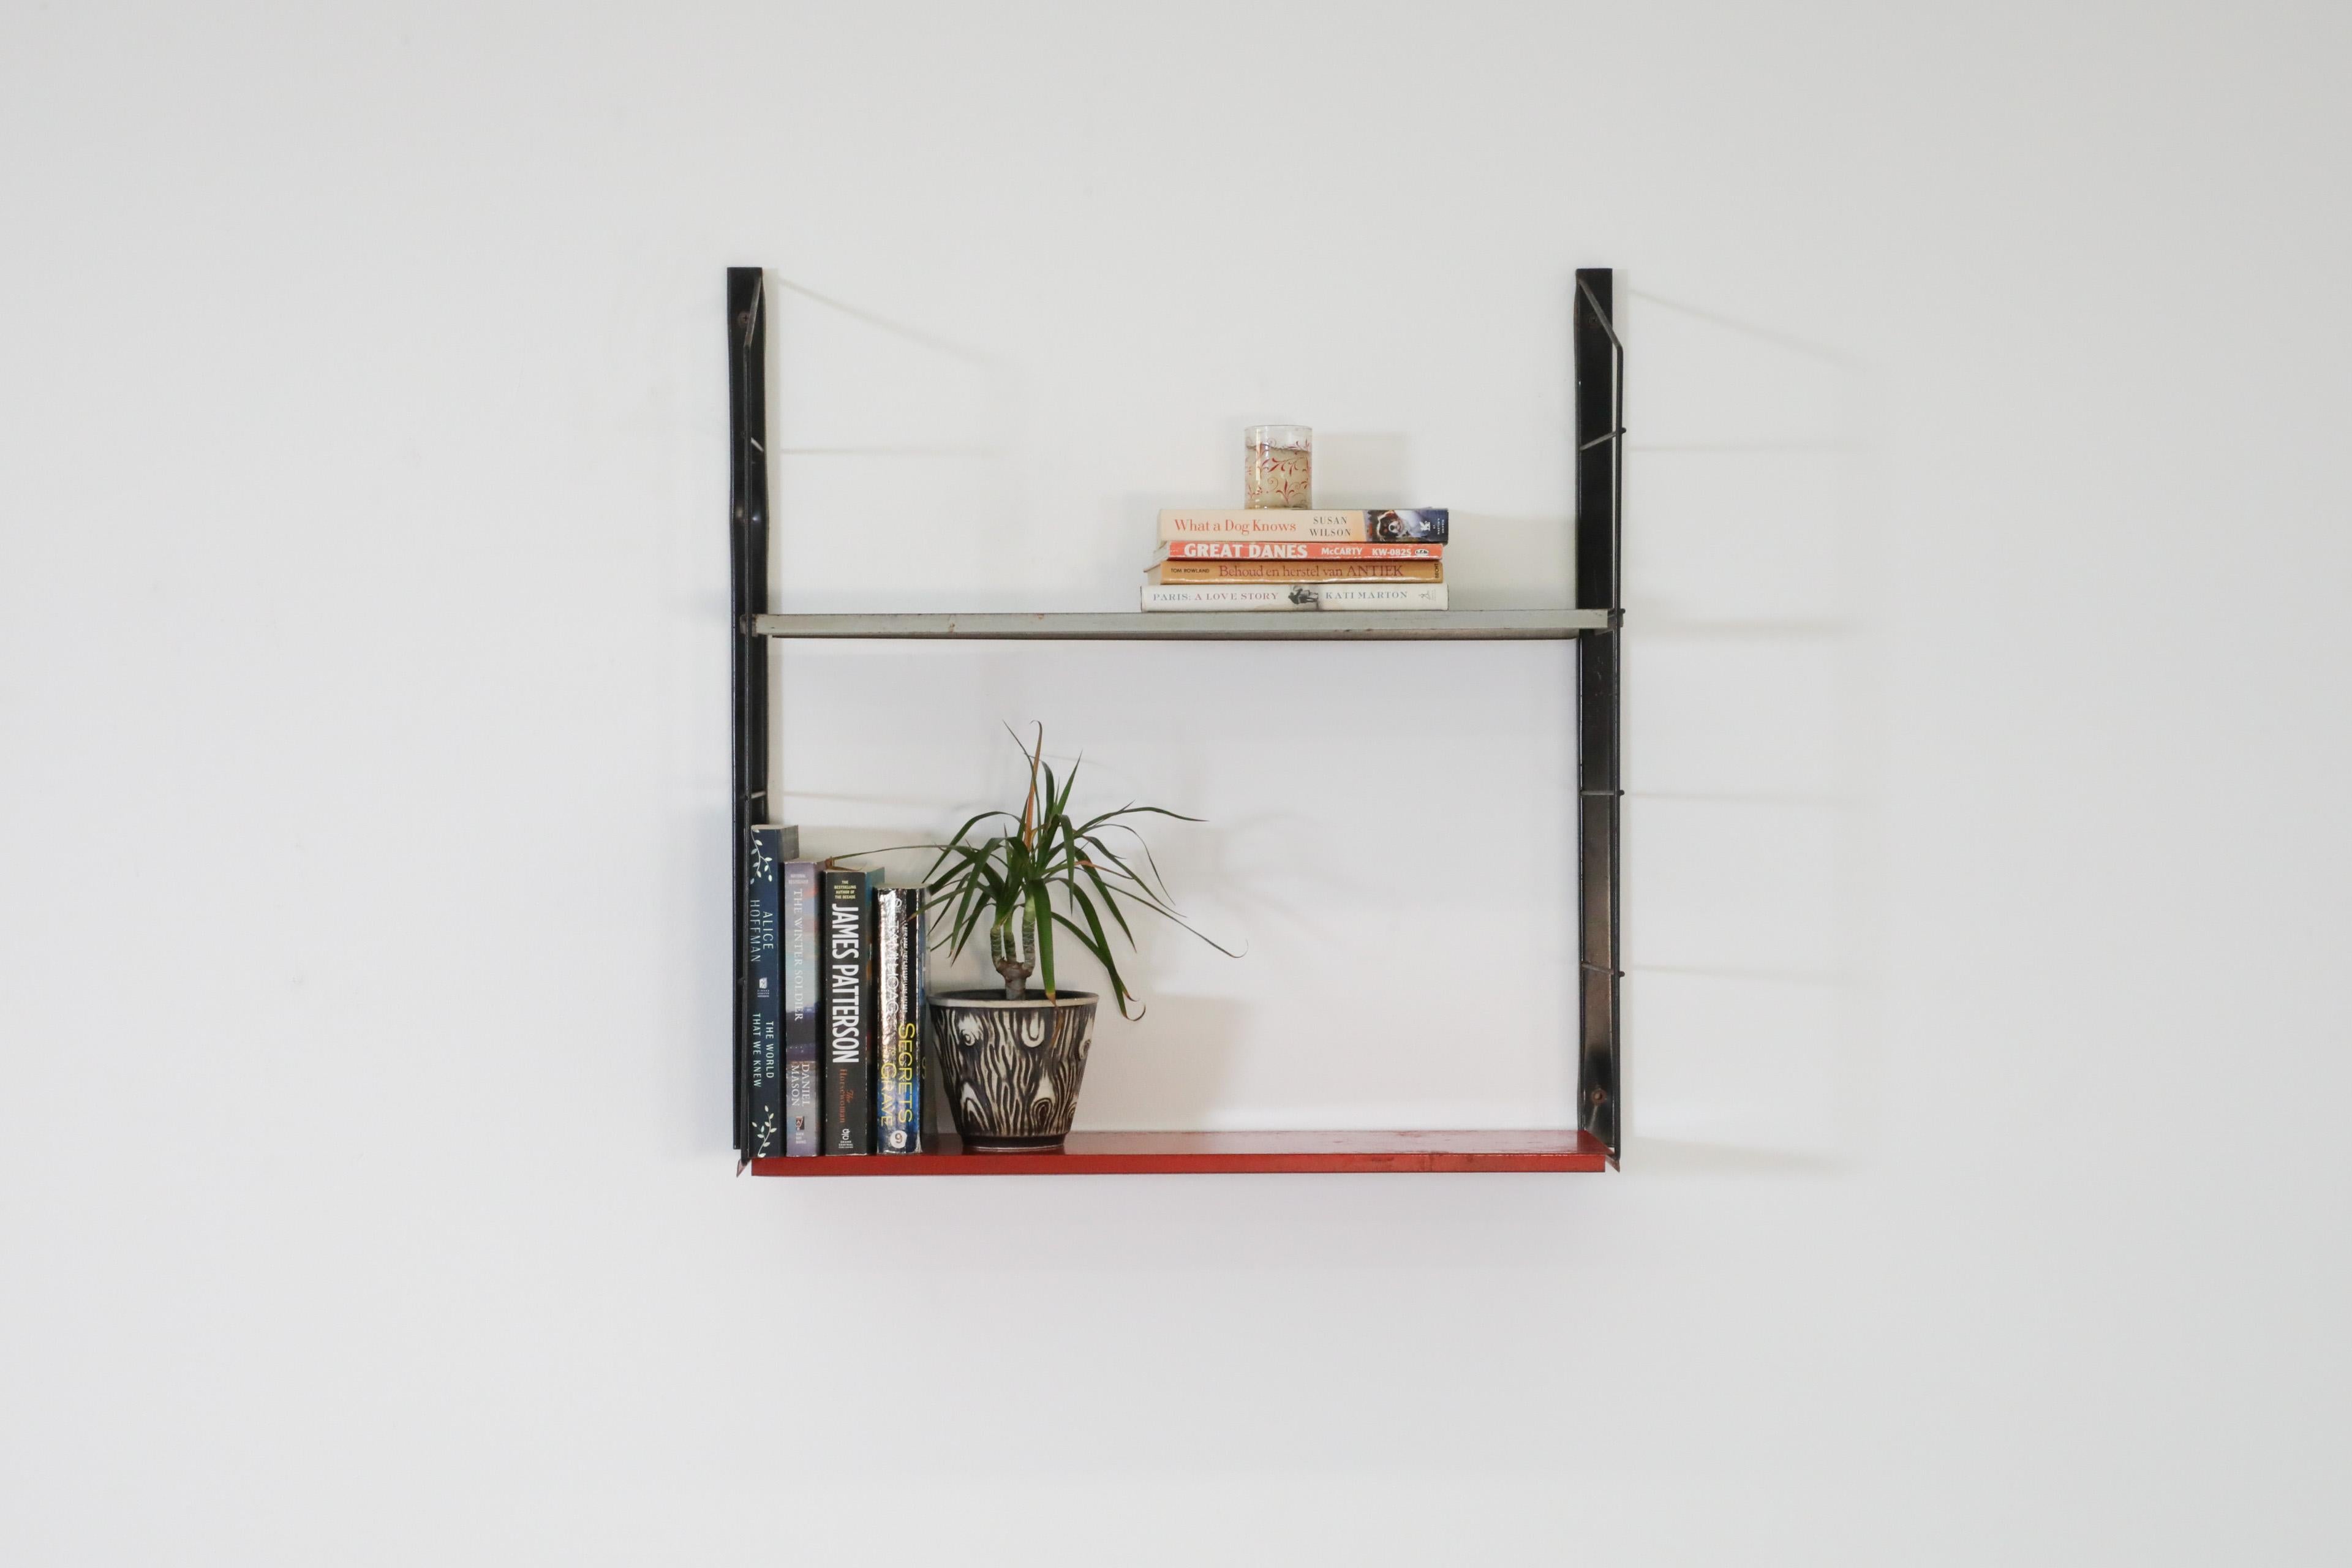 Dutch Mid-Century, single section wall mounted Tomado style industrial shelving unit with gray and red metal shelves on black wire risers. Has the added feature that the unit can be used in a slightly wider configuration depending on how you mount